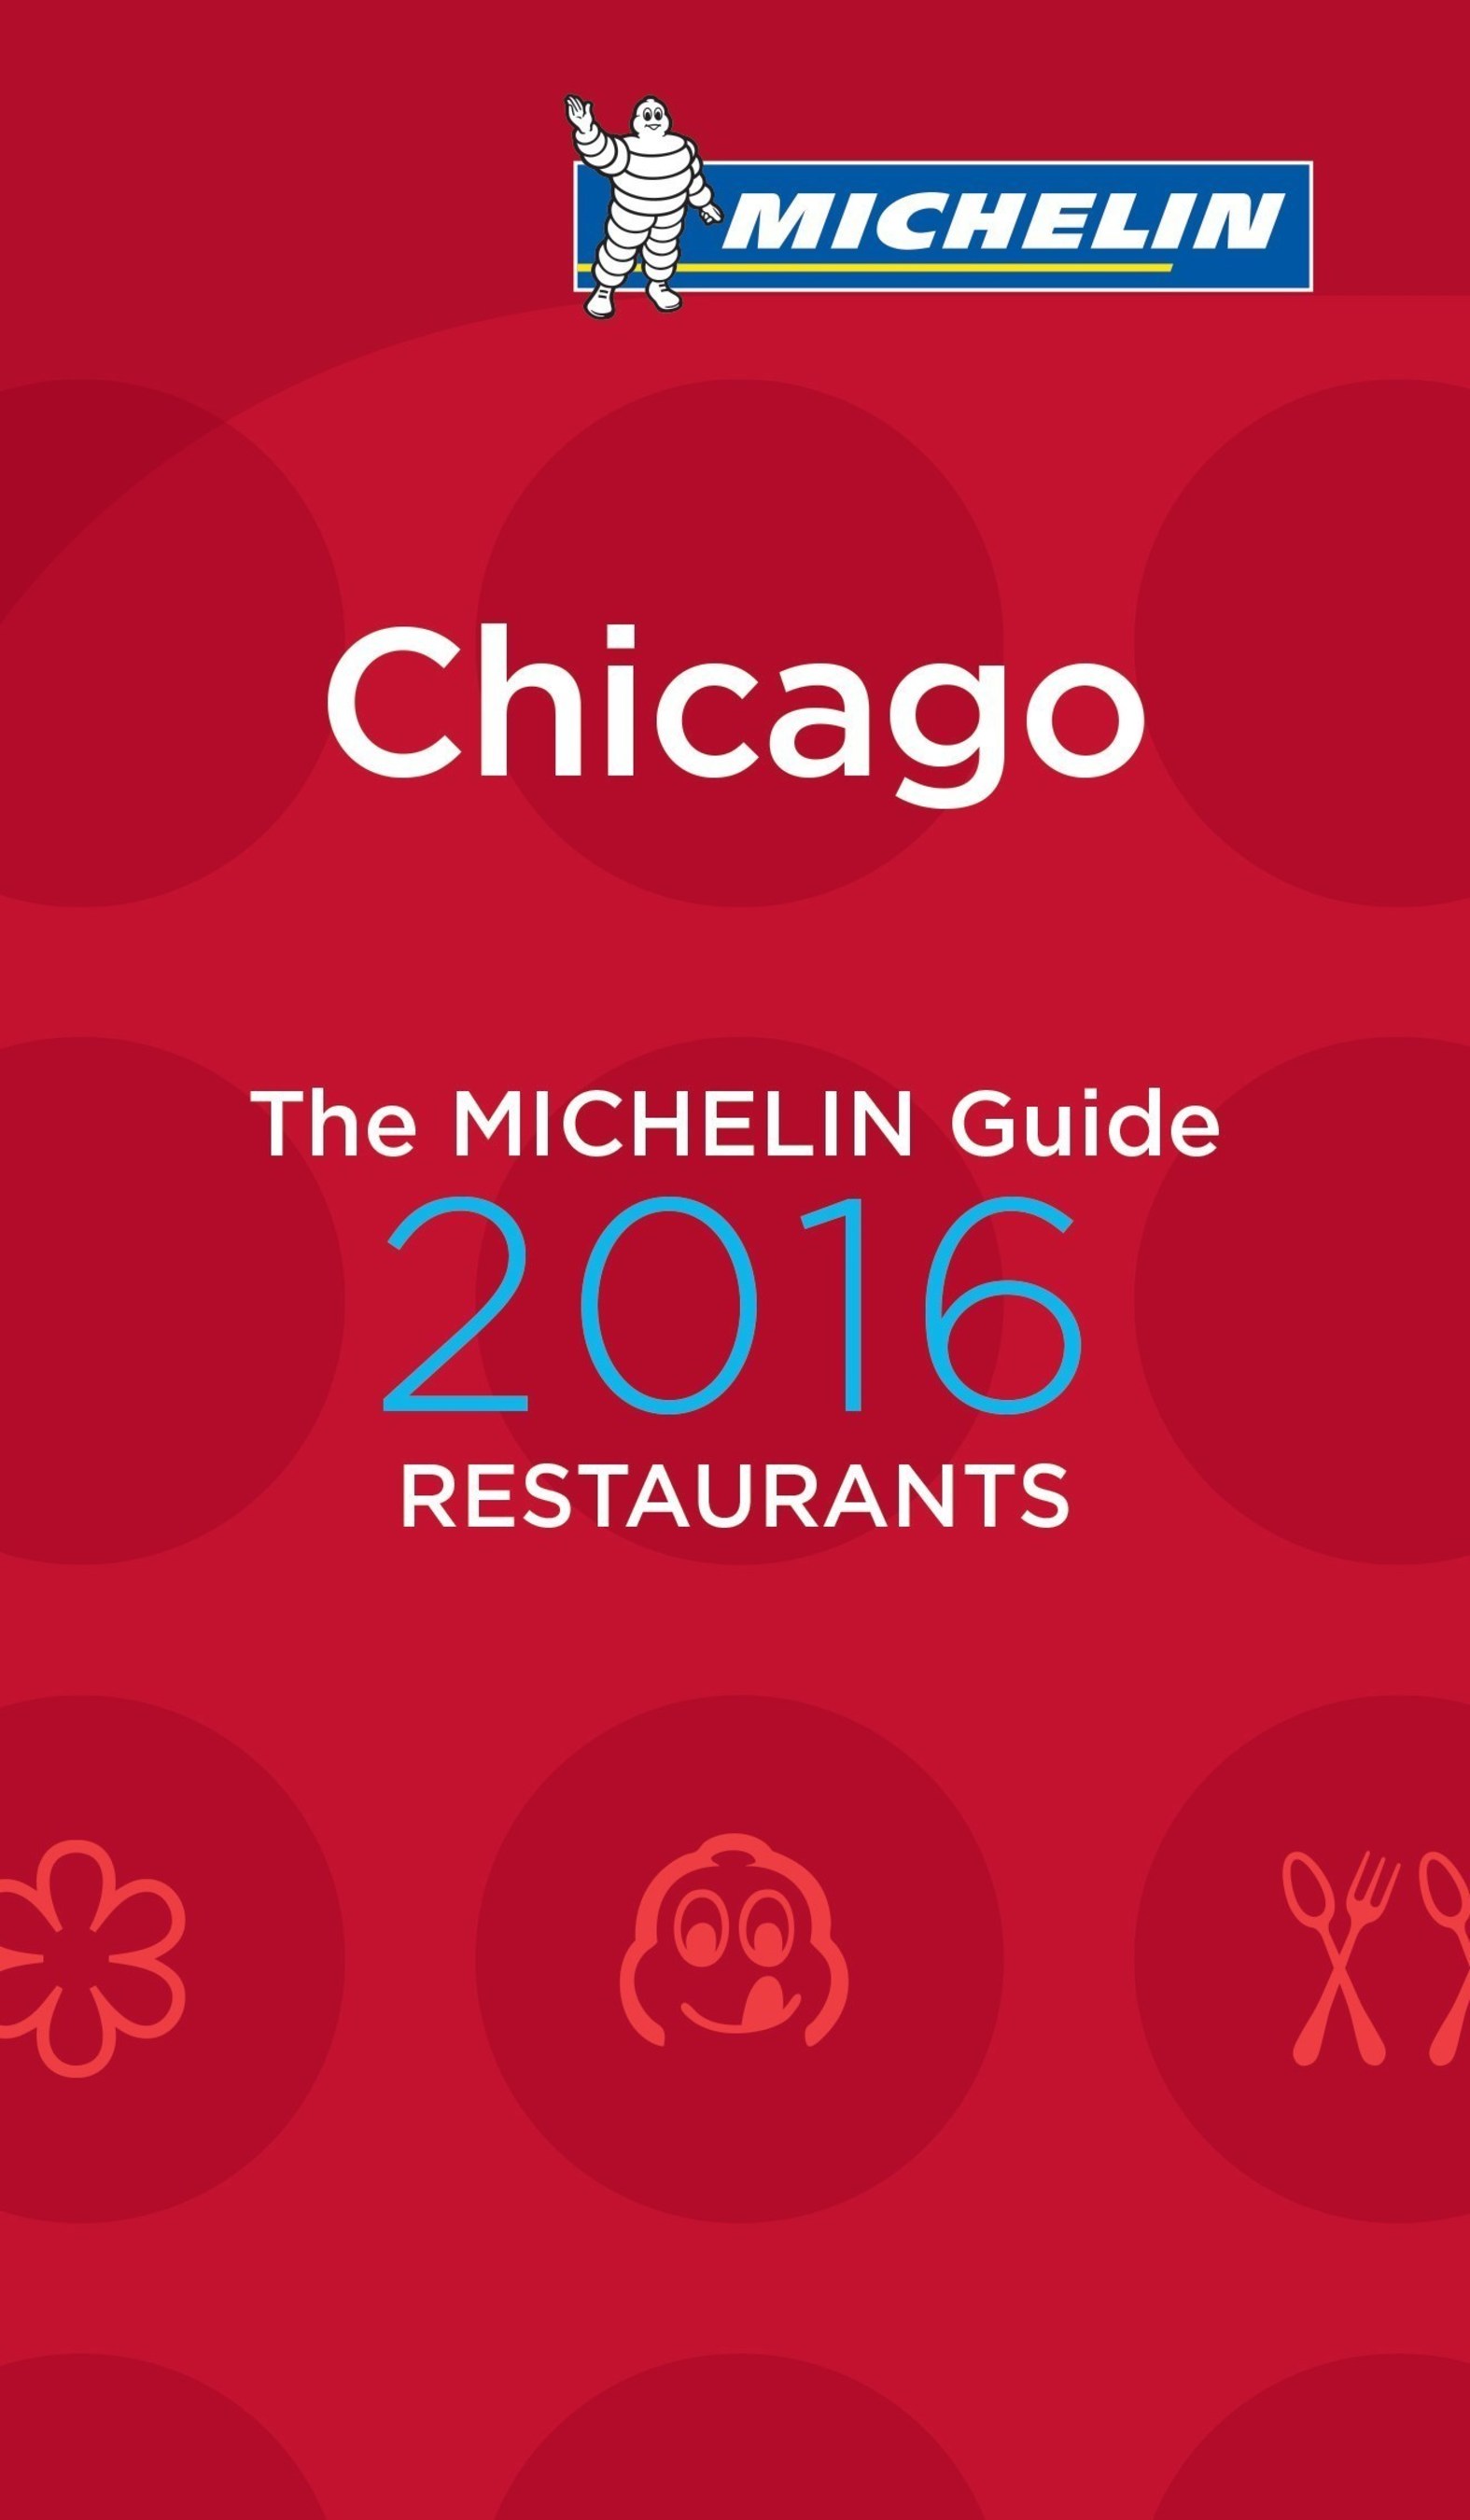 South Loop's Acadia Is Awarded Two Stars In The Michelin Guide Chicago 2016